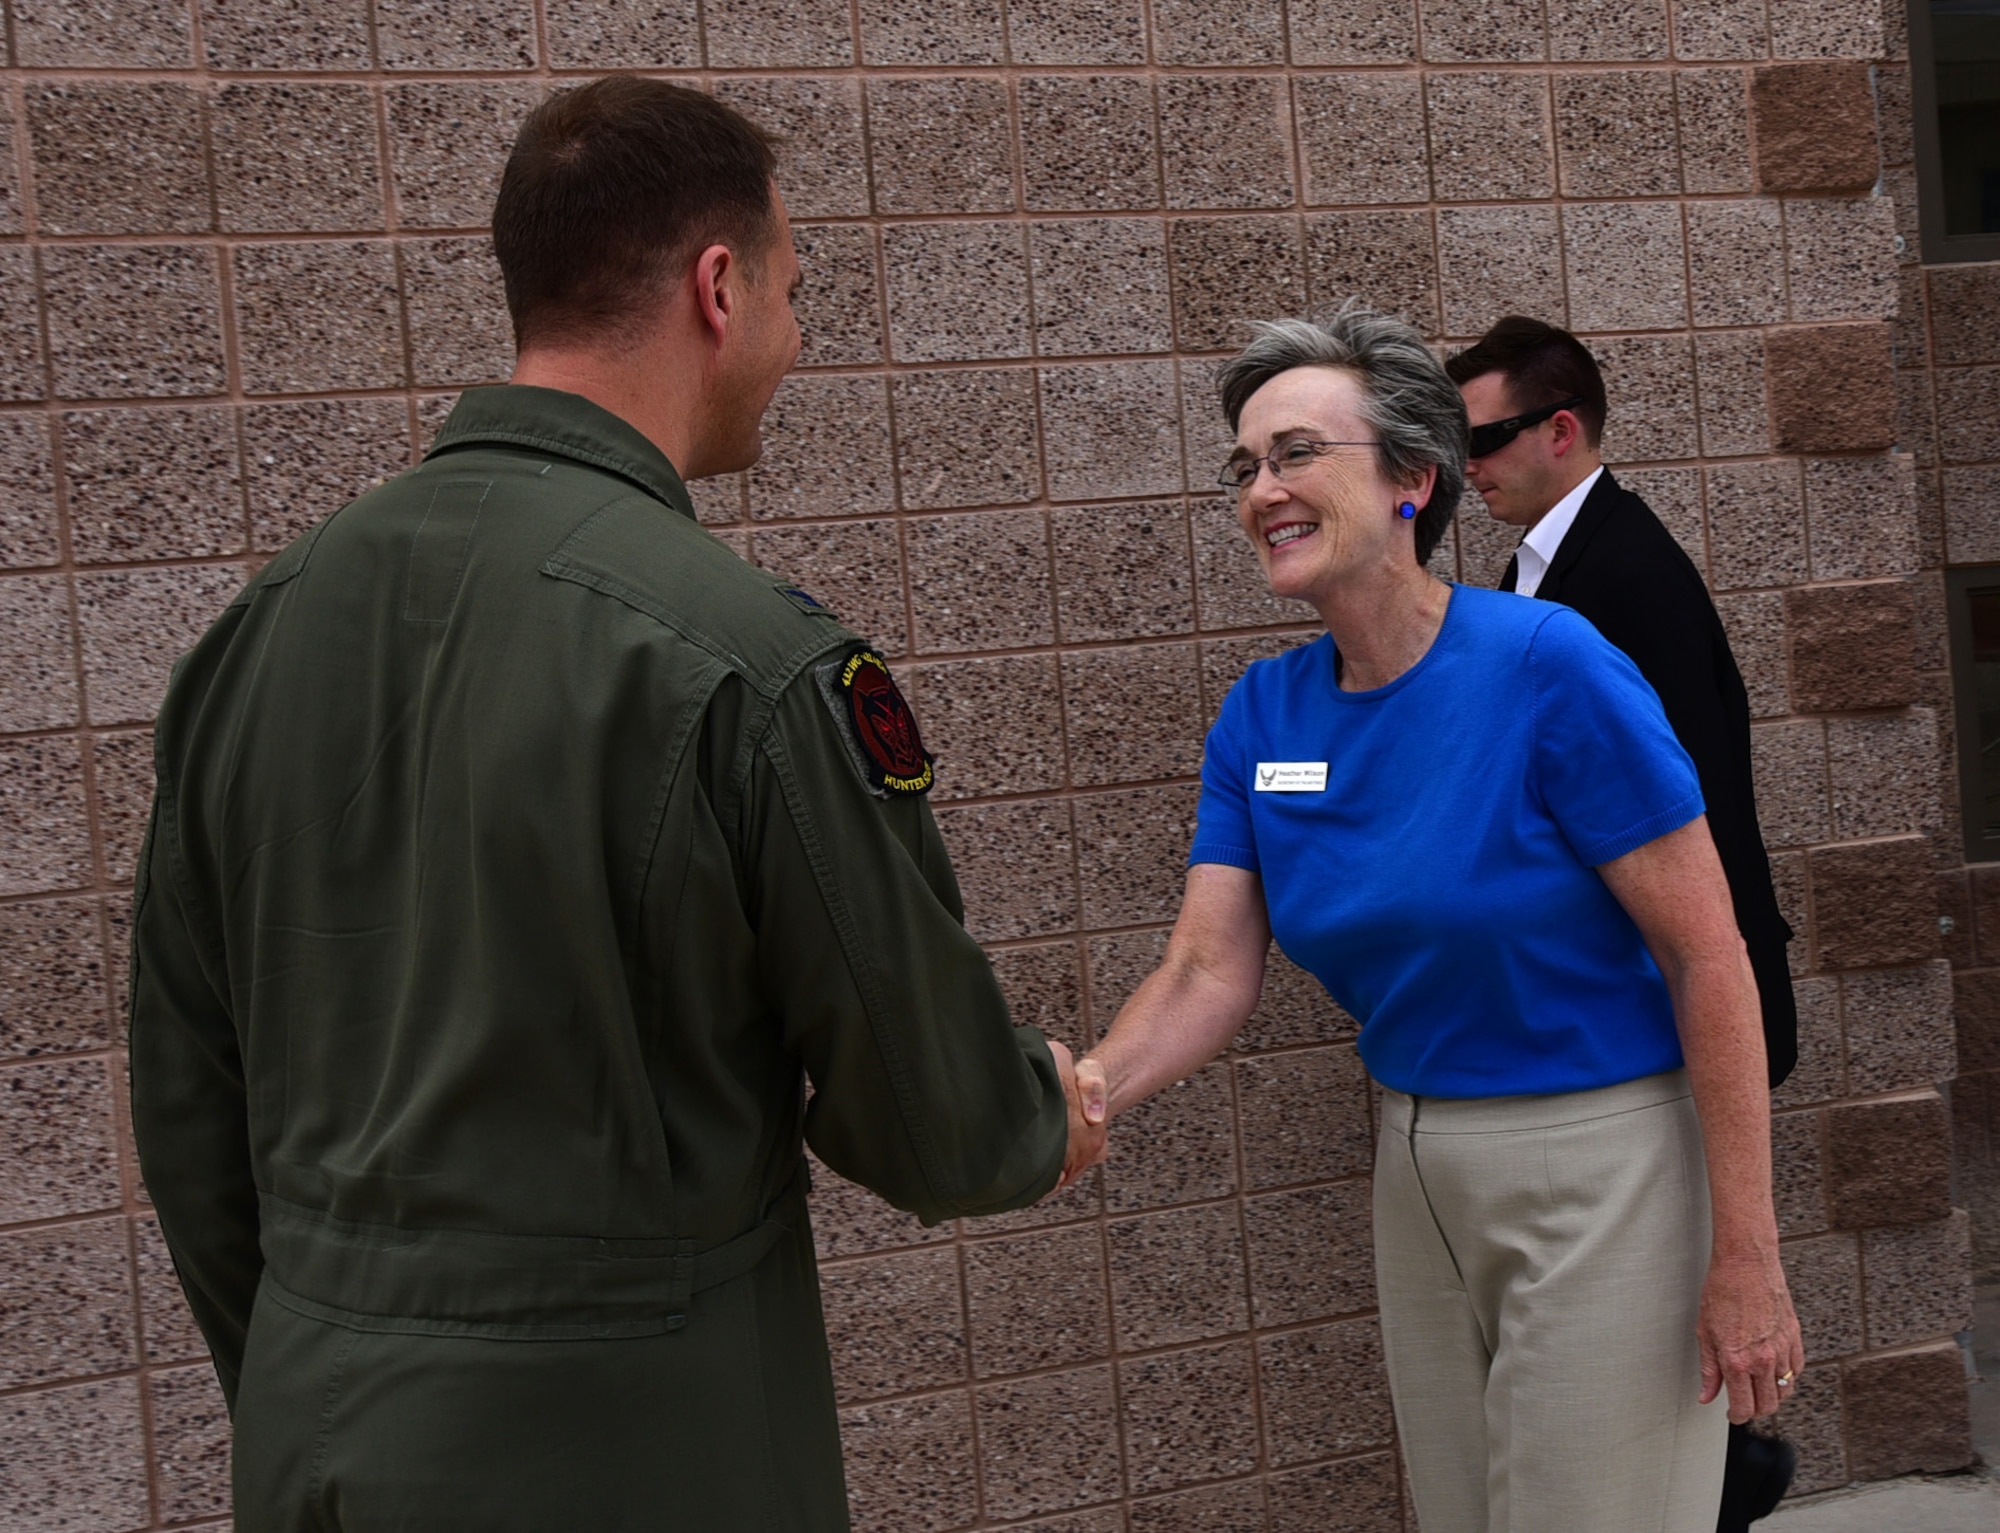 Secretary of the Air Force Heather Wilson meets with Col. Julian Cheater, 432nd Wing/432nd Air Expeditionary Wing commander, July 19, 2017, at Creech Air Force Base, Nev. During her visit, Wilson toured the base and gained insight into the dominant persistent attack and reconnaissance mission the Airmen of the 432nd WG complete 24/7/365 for our nation and coalition partners. (U.S. Air Force photo/Senior Airman Christian Clausen)